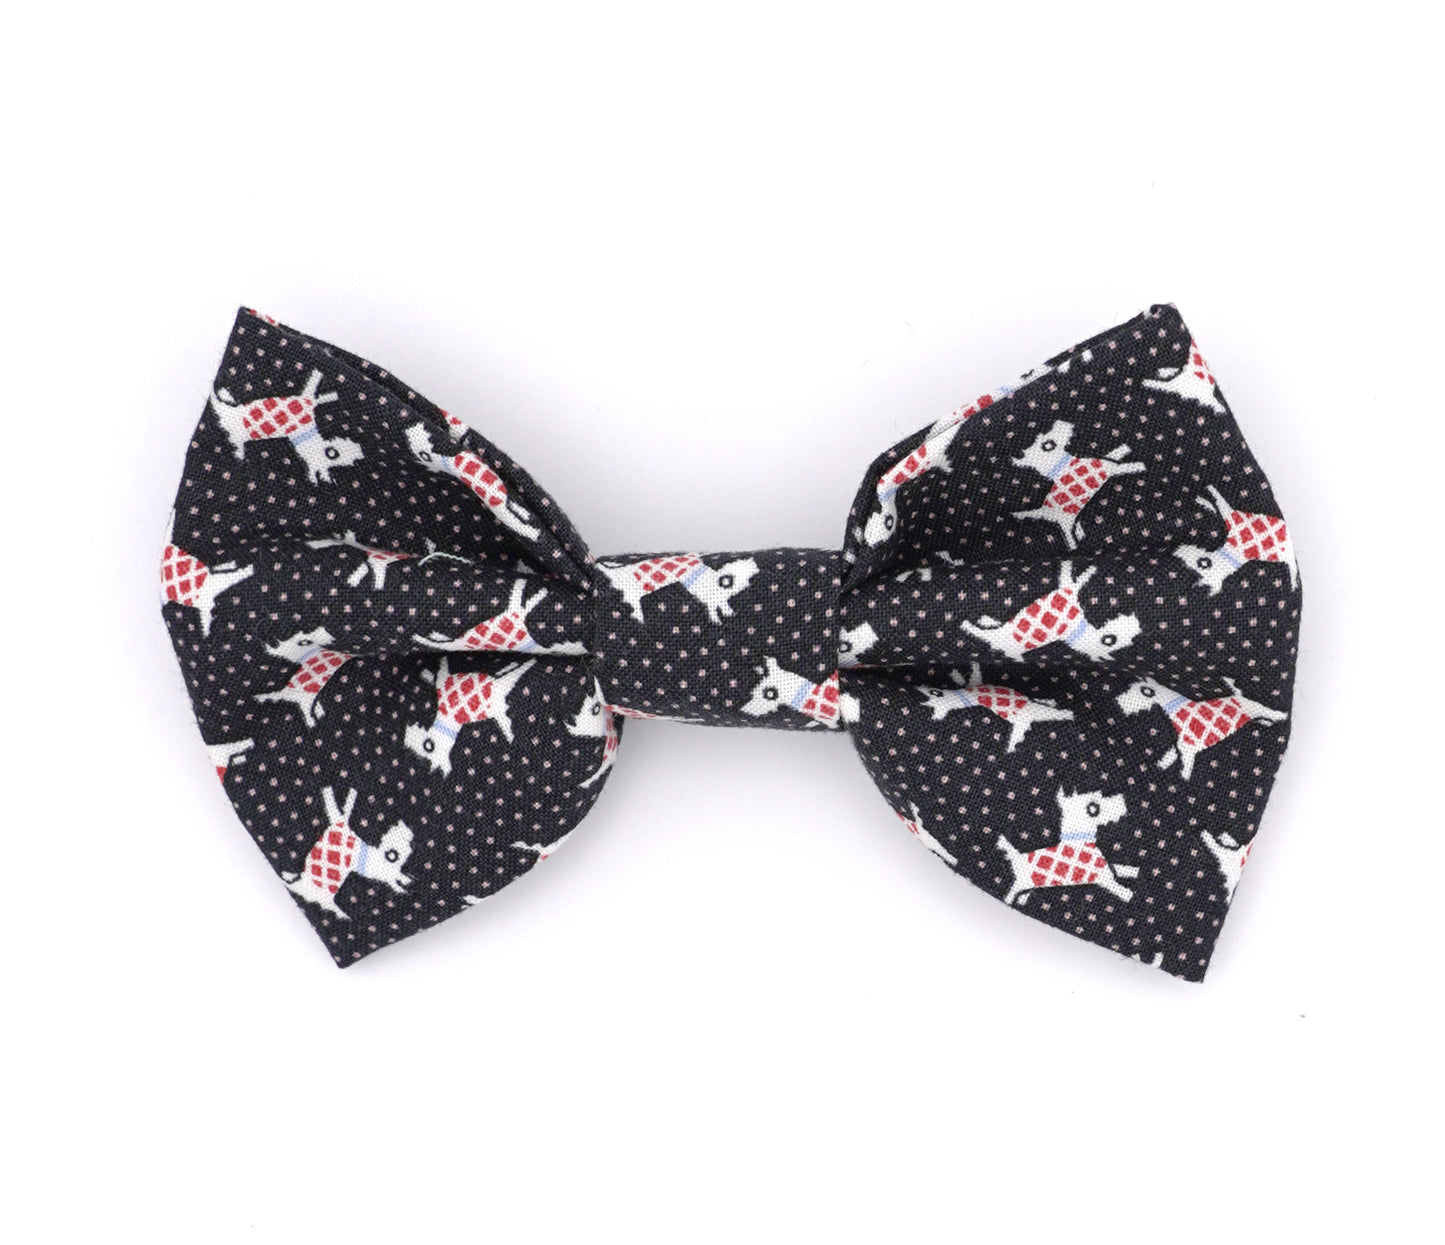 Handmade cotton bow tie for dogs (or other pets). Elastic straps on back with snaps make it easy to add to collar, harness, or leash. Black background with pink polka dots, and white Scottie Dogs wearing red/white checked sweaters,  and blue collars.